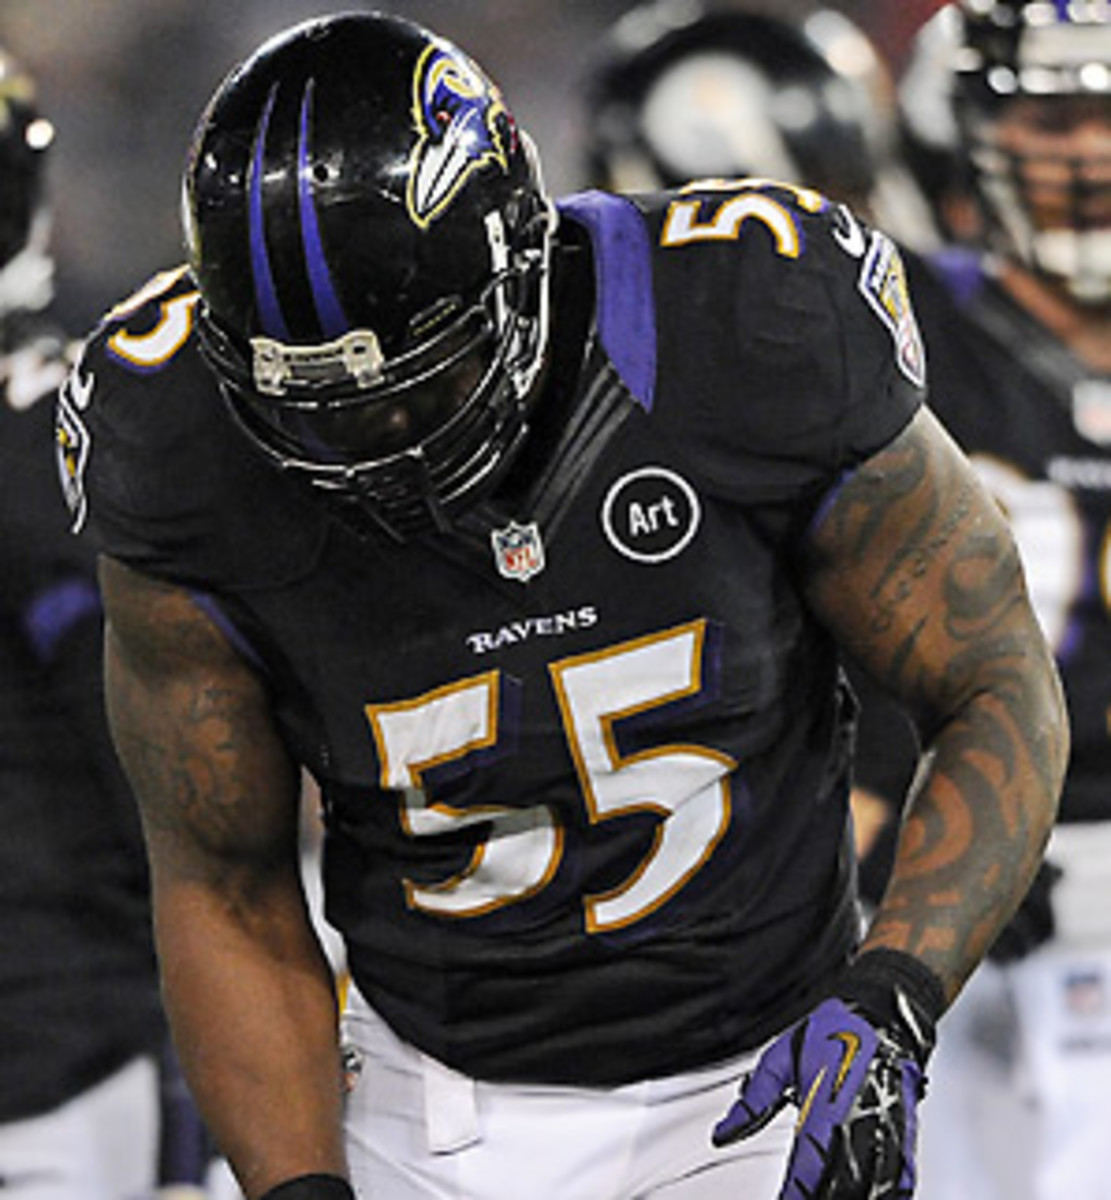 Terrell Suggs made his first appearance of the season in Week 7 following an offseason Achilles injury. (Patrick Smith/Getty Images)